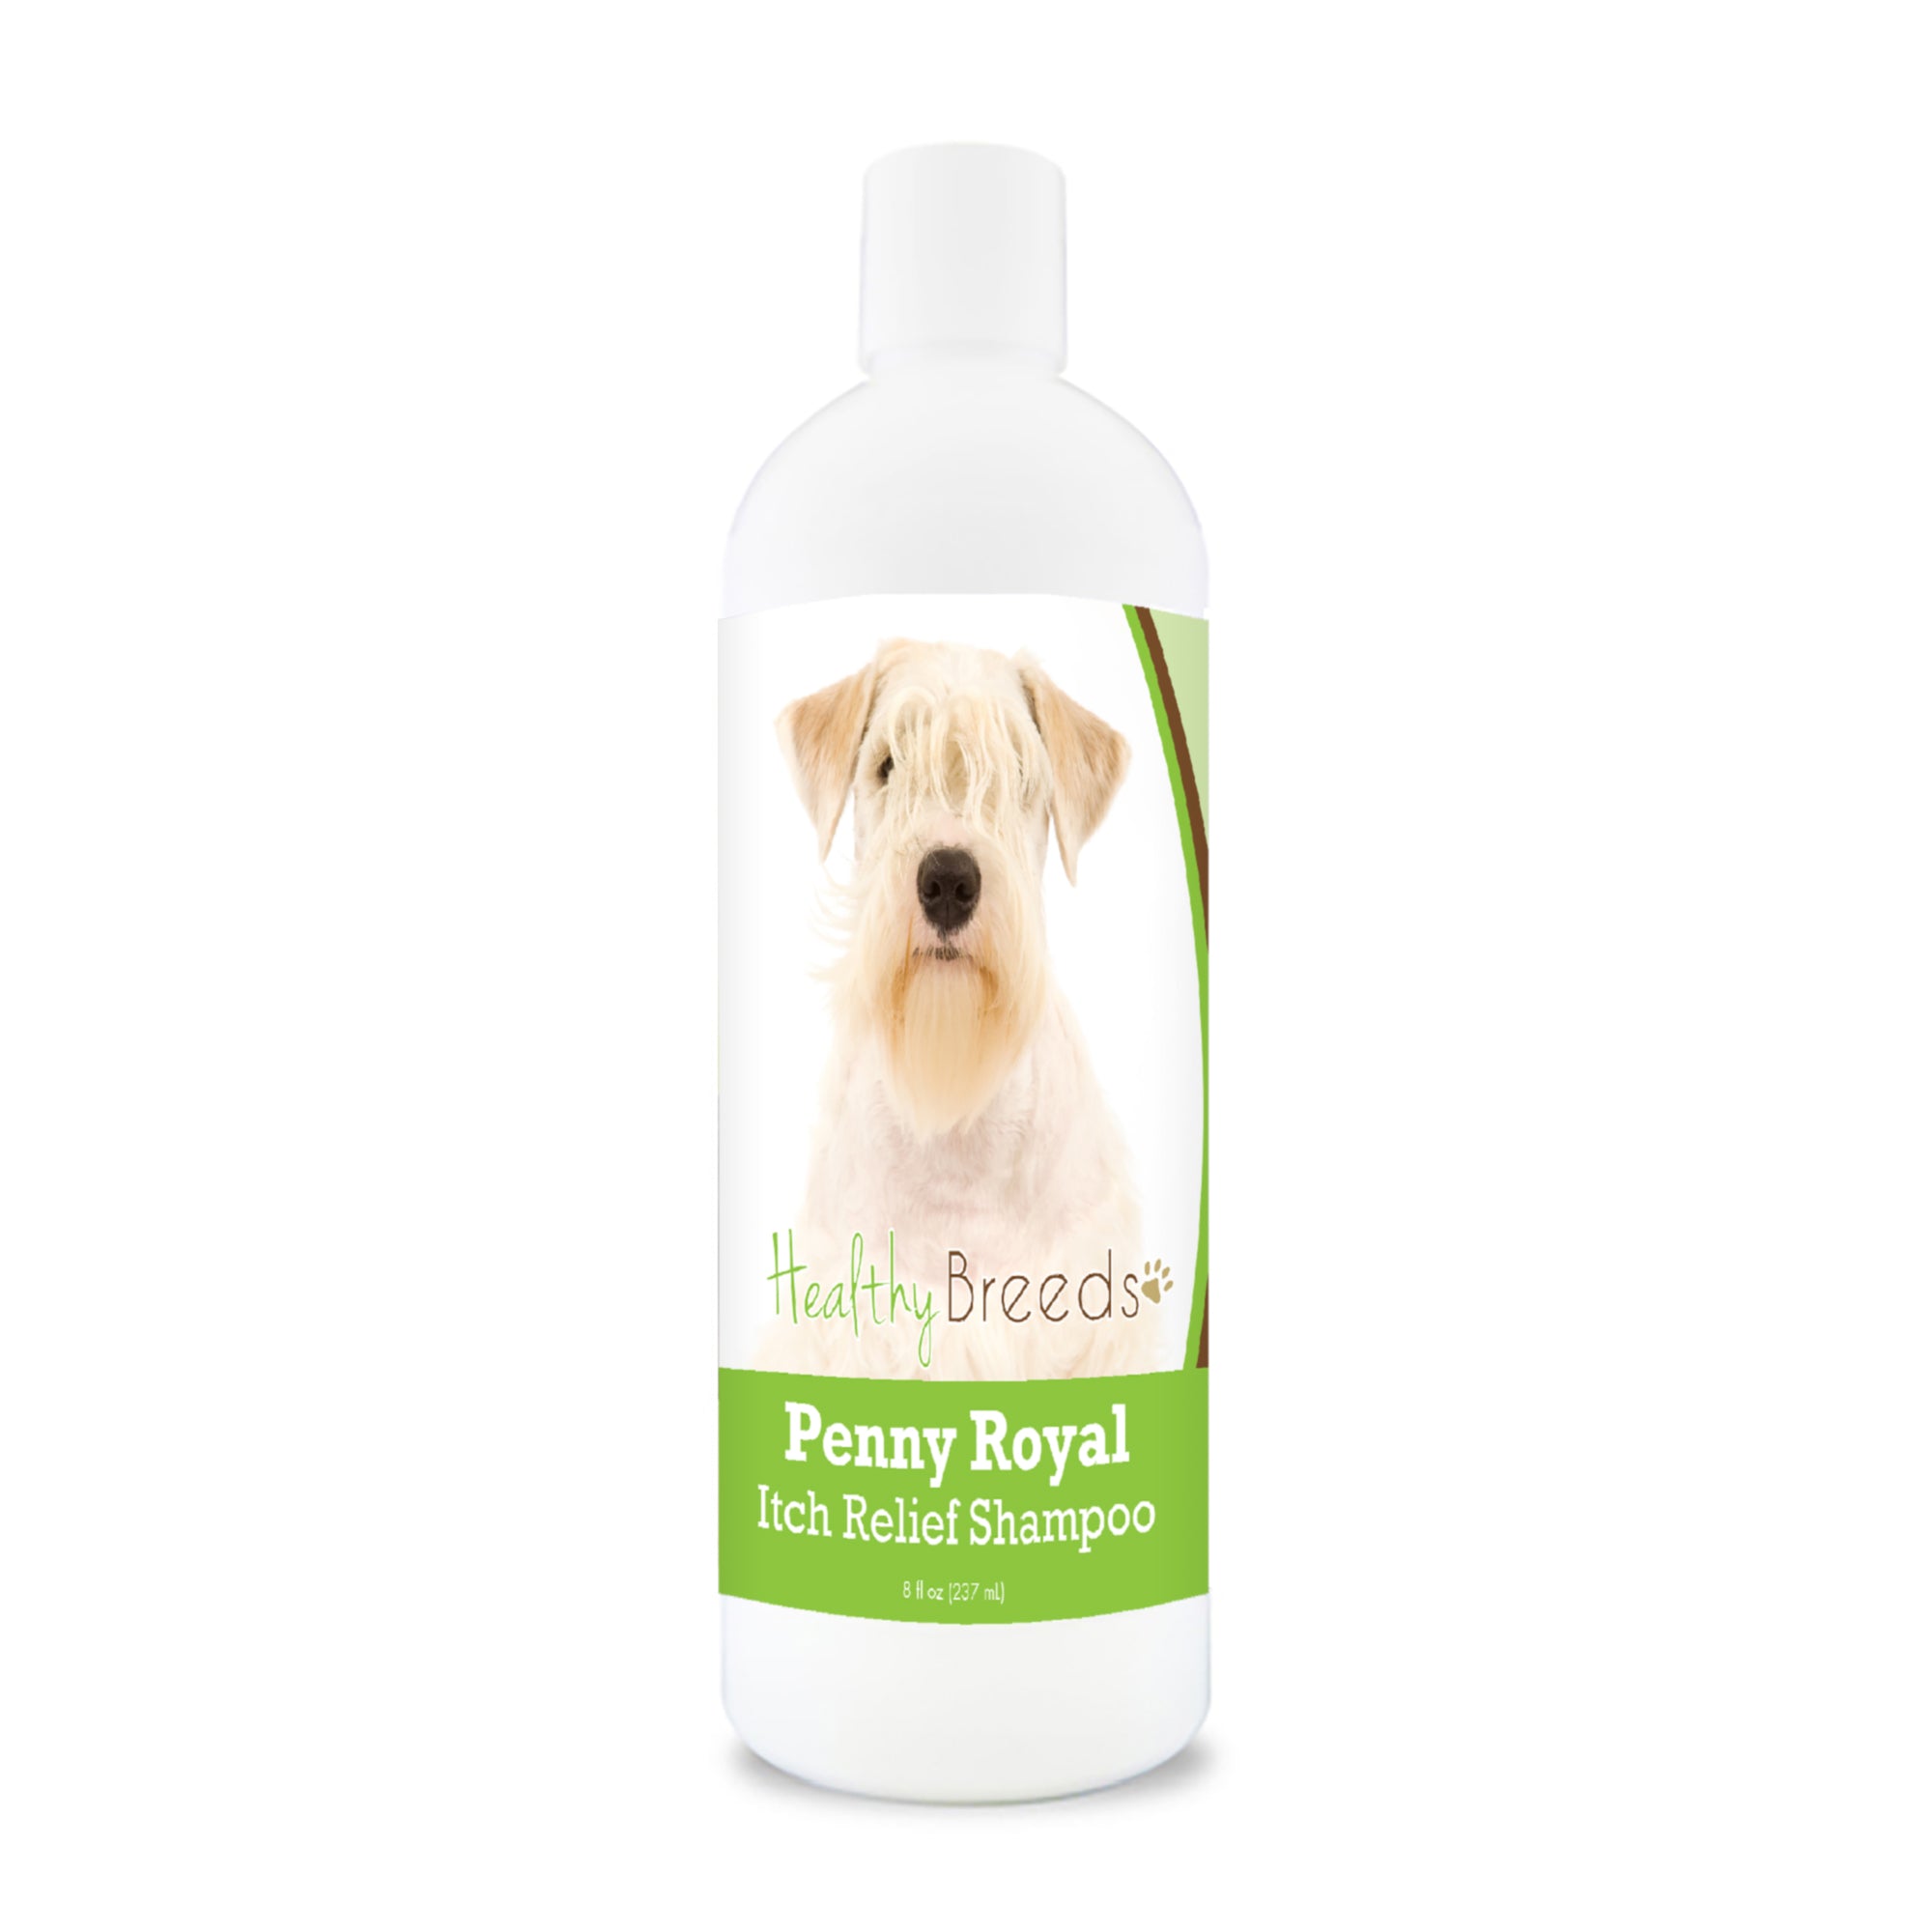 Sealyham Terrier Penny Royal Itch Relief Shampoo 8 oz